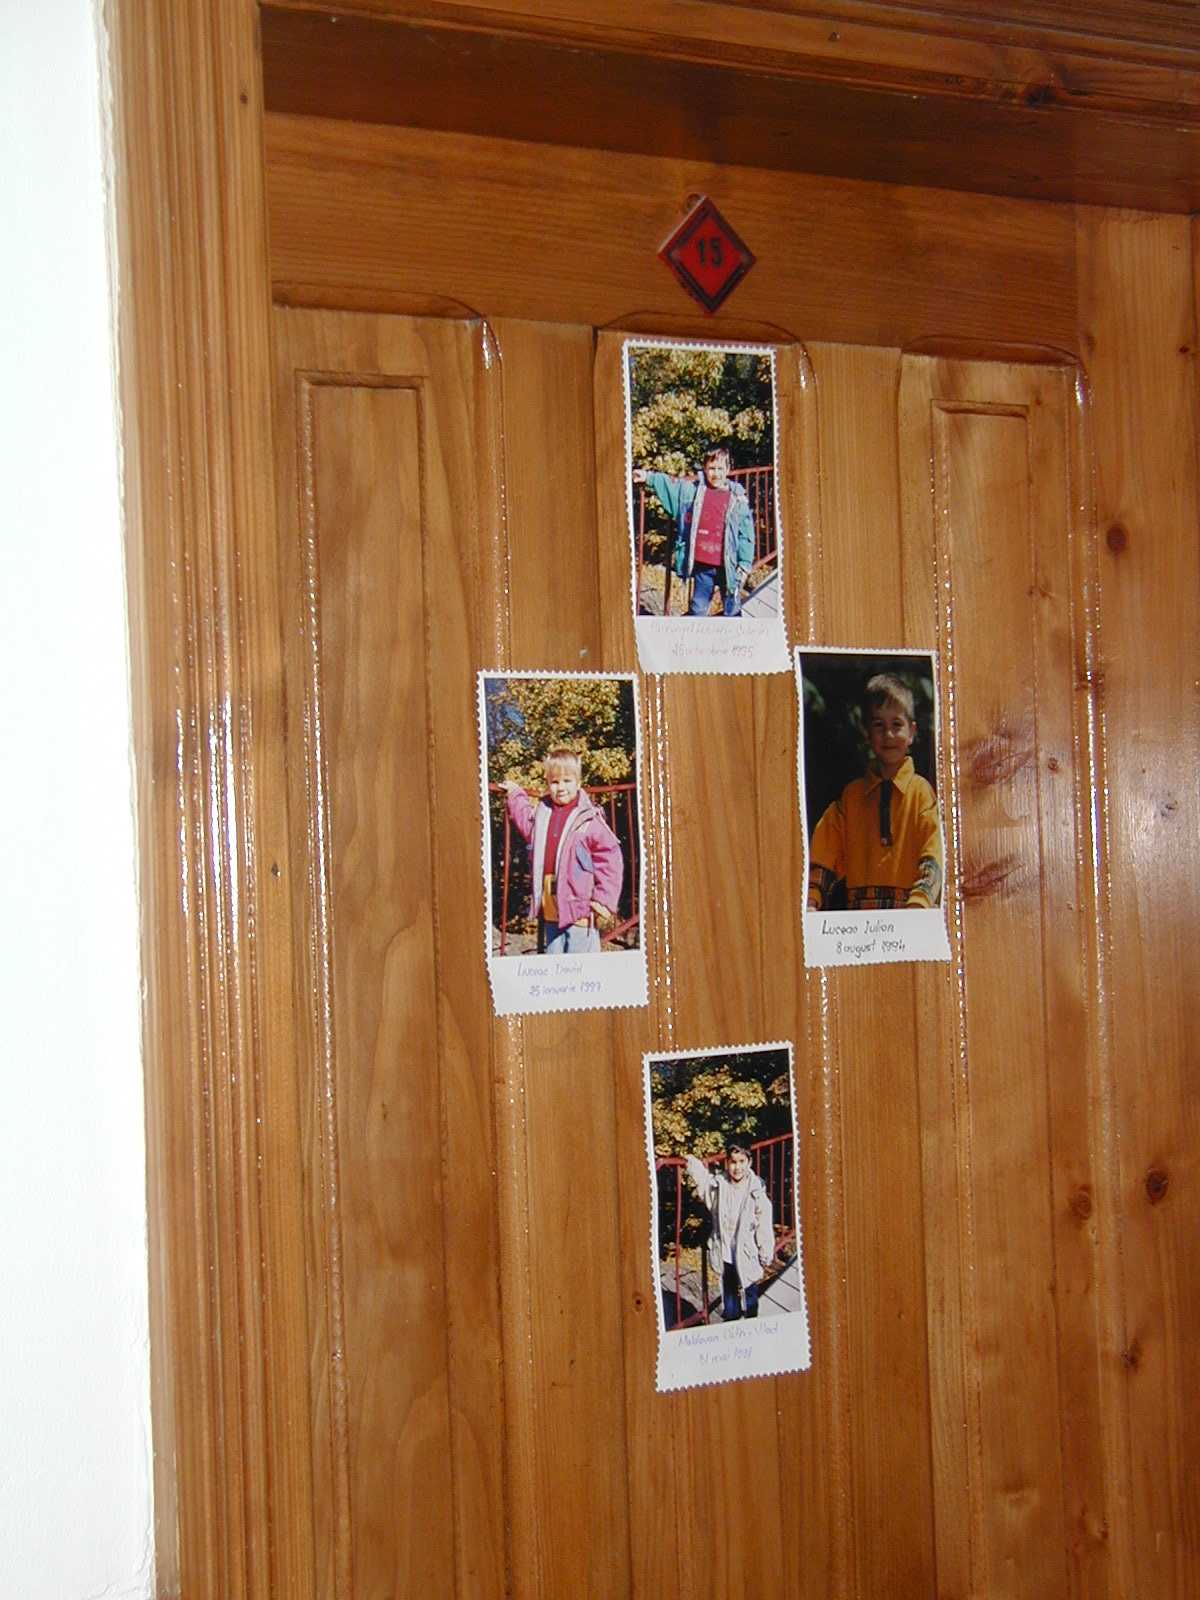 The children decorate the door to their room with pictures of themselves.